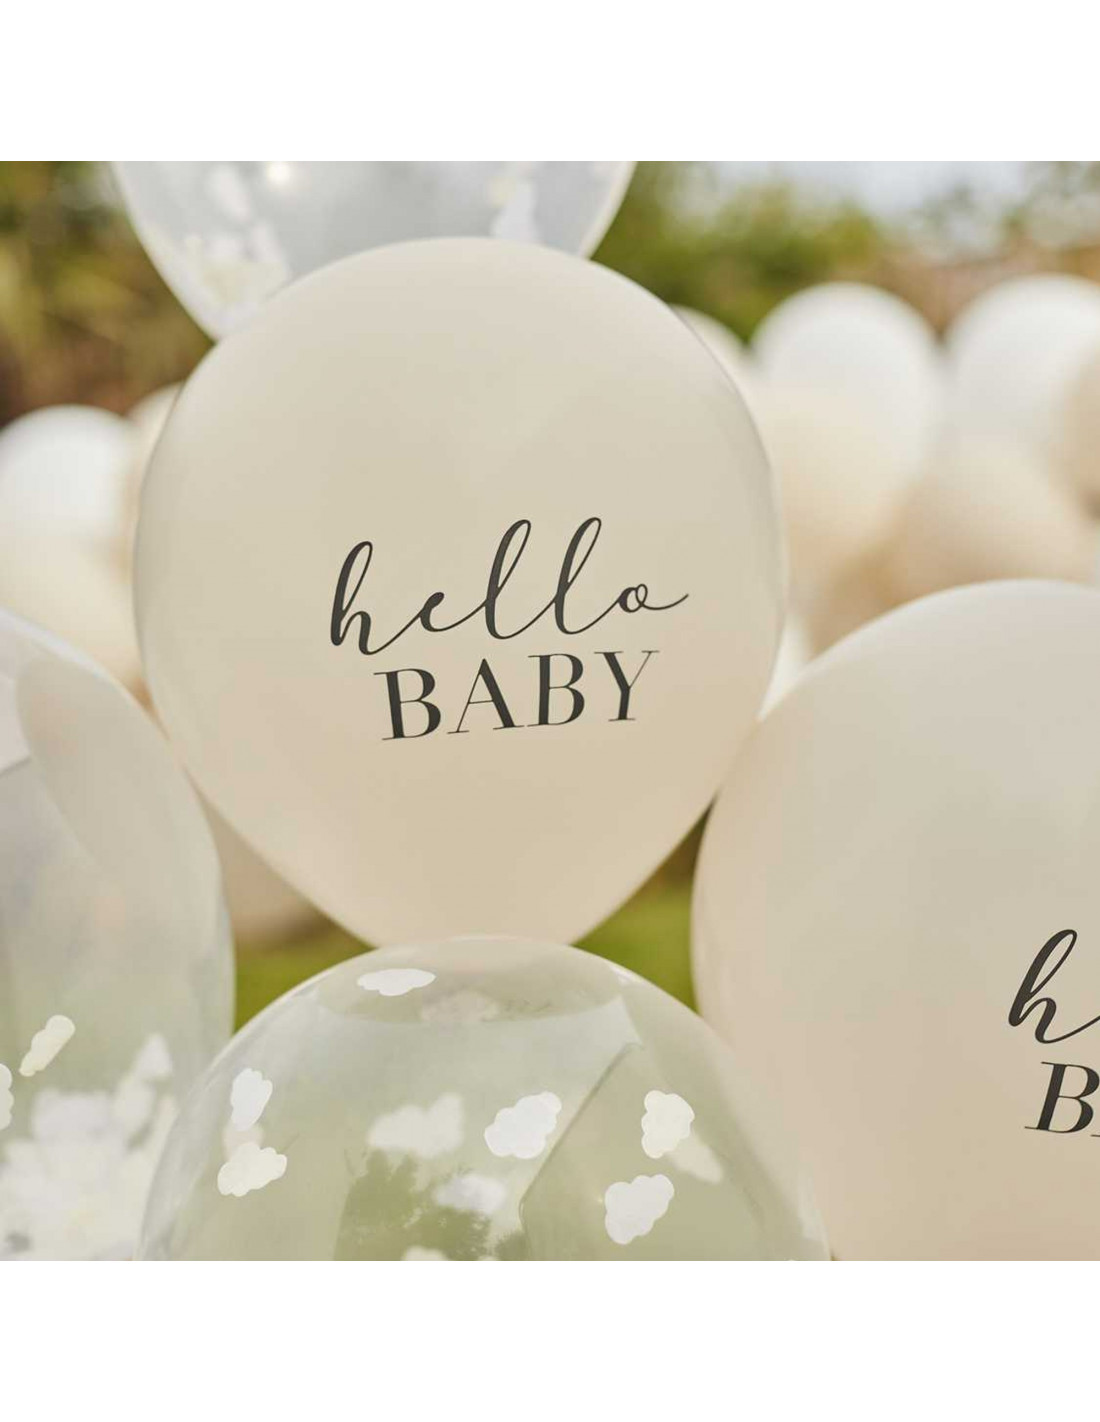 https://images2.lesbambetises.com/20731-thickbox_default/5-ballons-hello-baby-beige-confettis-nuages.jpg